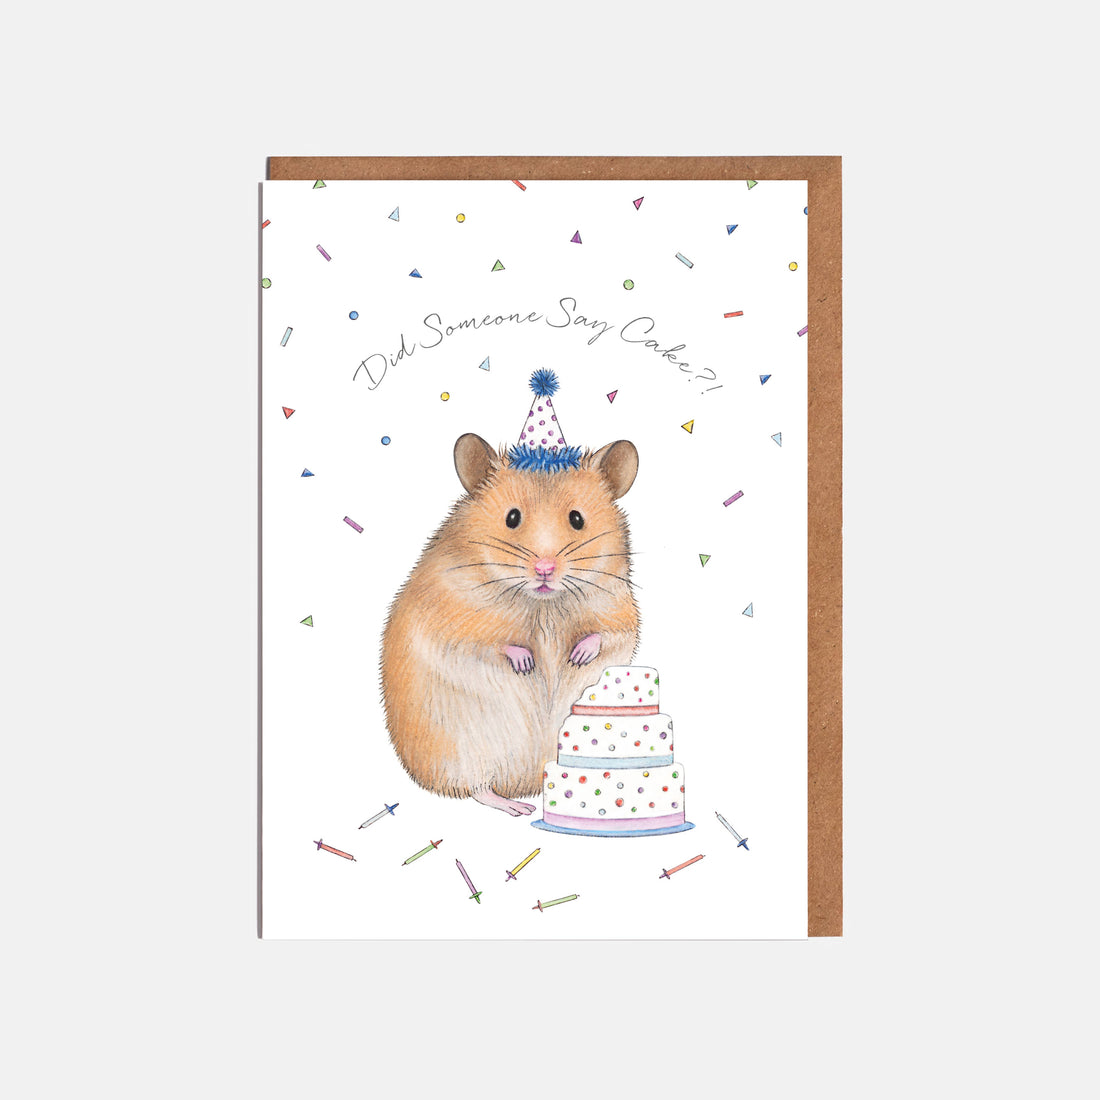 A delightful Hamster &amp; Cake Birthday Card featuring a hamster with birthday wishes by Lottie Murphy.